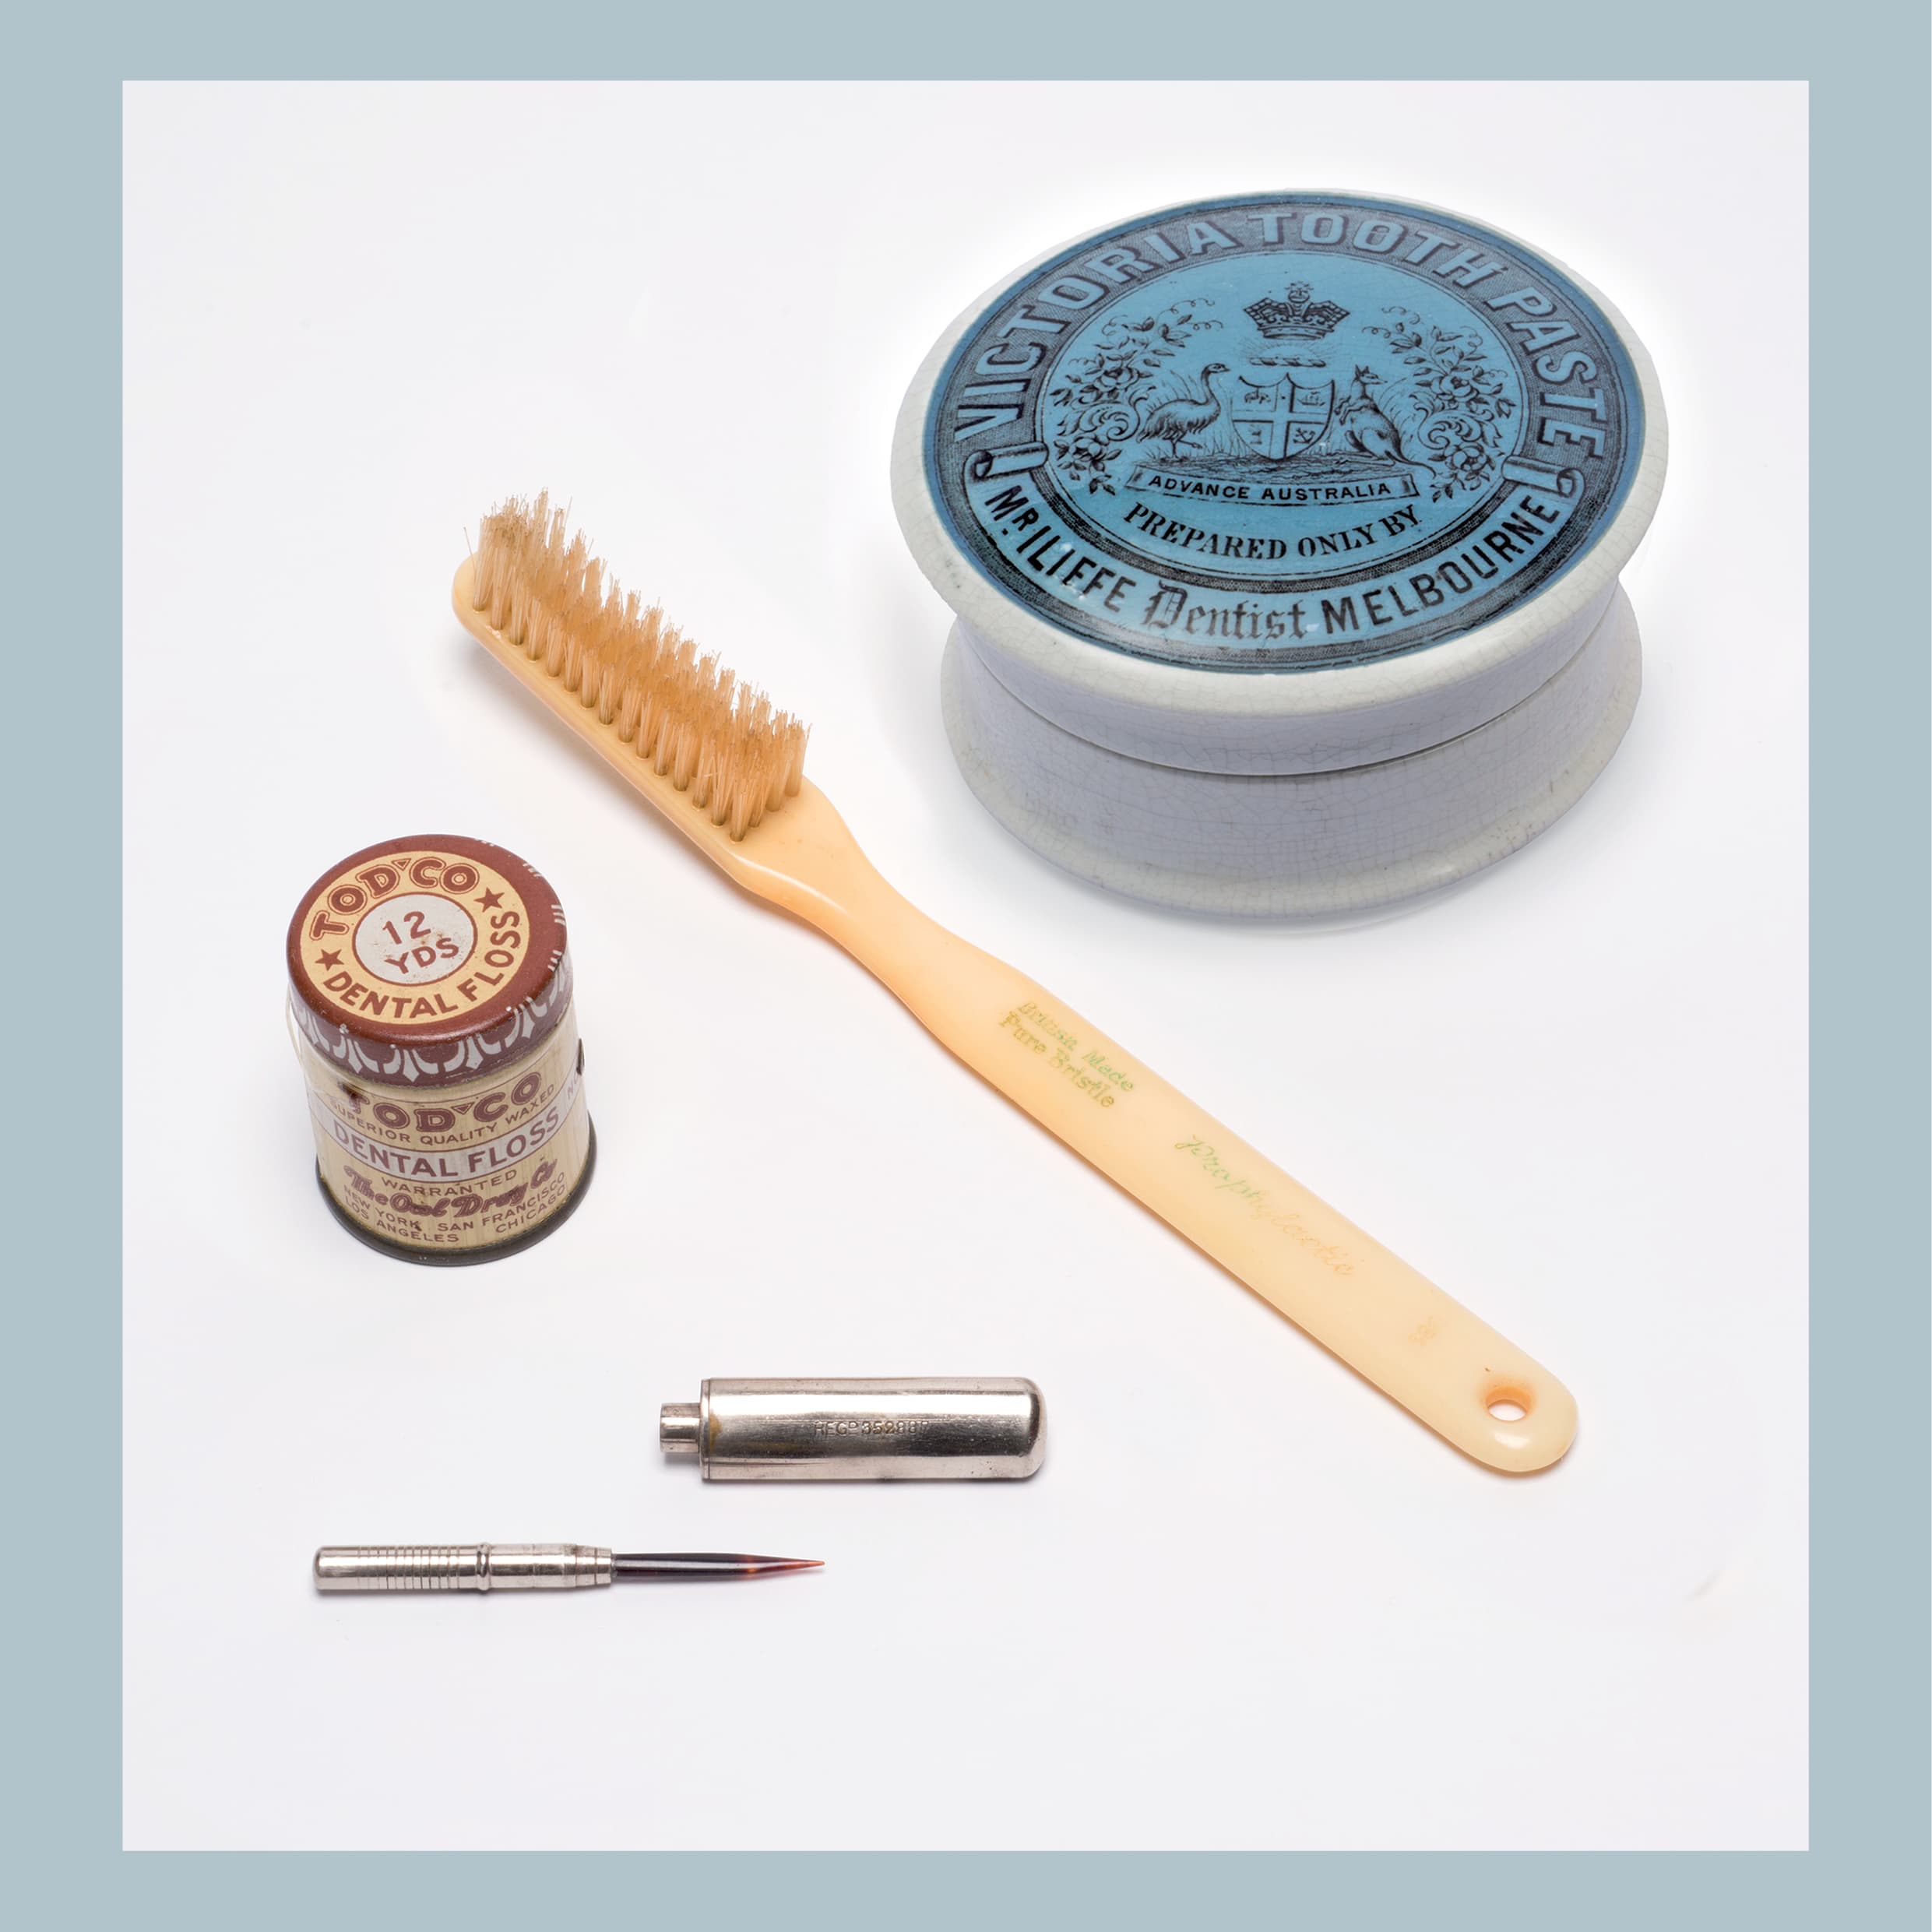 Clockwise from top:  John Iliffe (1846–1914), Victoria toothpaste jar, c. 1900, porcelain, 2.0 × 5.5 cm (diam.), HFADM 3146. Florence Manufacturing Company (Florence, Massachusetts, active 1866–1924), Toothbrush, 1910, bristle, plastic, 16.5 × 1.5 × 2.0 cm, HFADM 2128, gift of the Australian College of Dentistry 1963. Toothpick, c. 1890, brass, tortoiseshell, 6.0 × 1.0 cm (diam.), HFADM 784, gift of Jack Wunderly. The Owl Drug Company (USA, active 1892 – c. 1950), TOD’CO superior quality waxed dental floss, c. 1898, wood, steel, silk; 3.5 × 3.5 cm (diam.), HFADM 1094, gift of Dr Ian Chippendale on behalf of a patient c. 1990. All from Henry Forman Atkinson Dental Museum, University of Melbourne. 